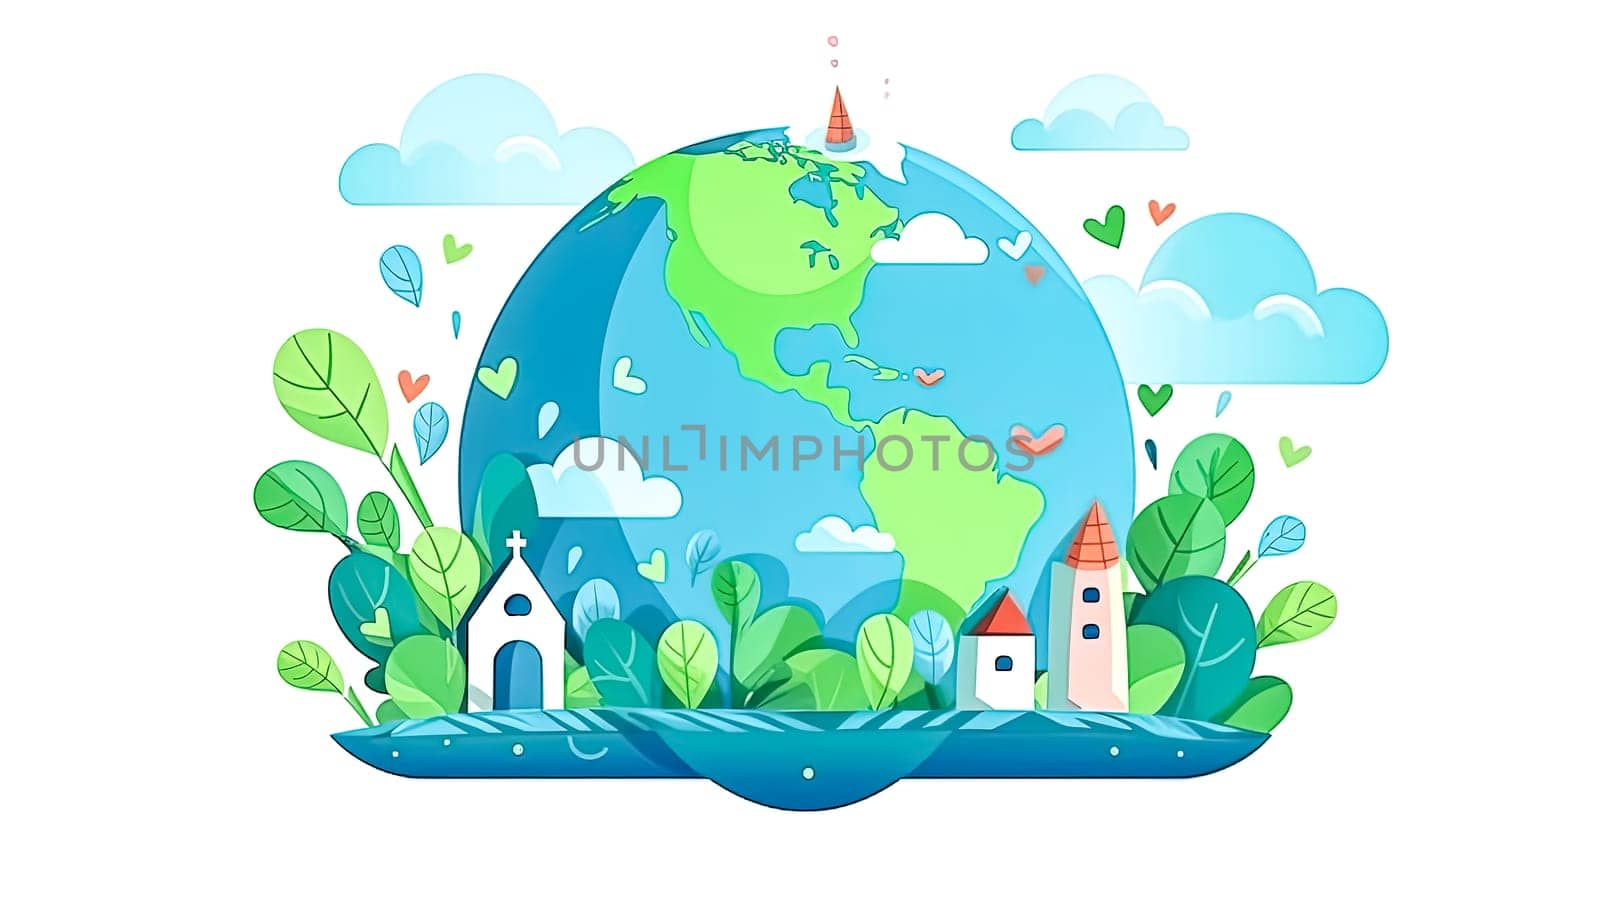 Earth adorned with trees and grass, a vibrant illustration of nature by Alla_Morozova93